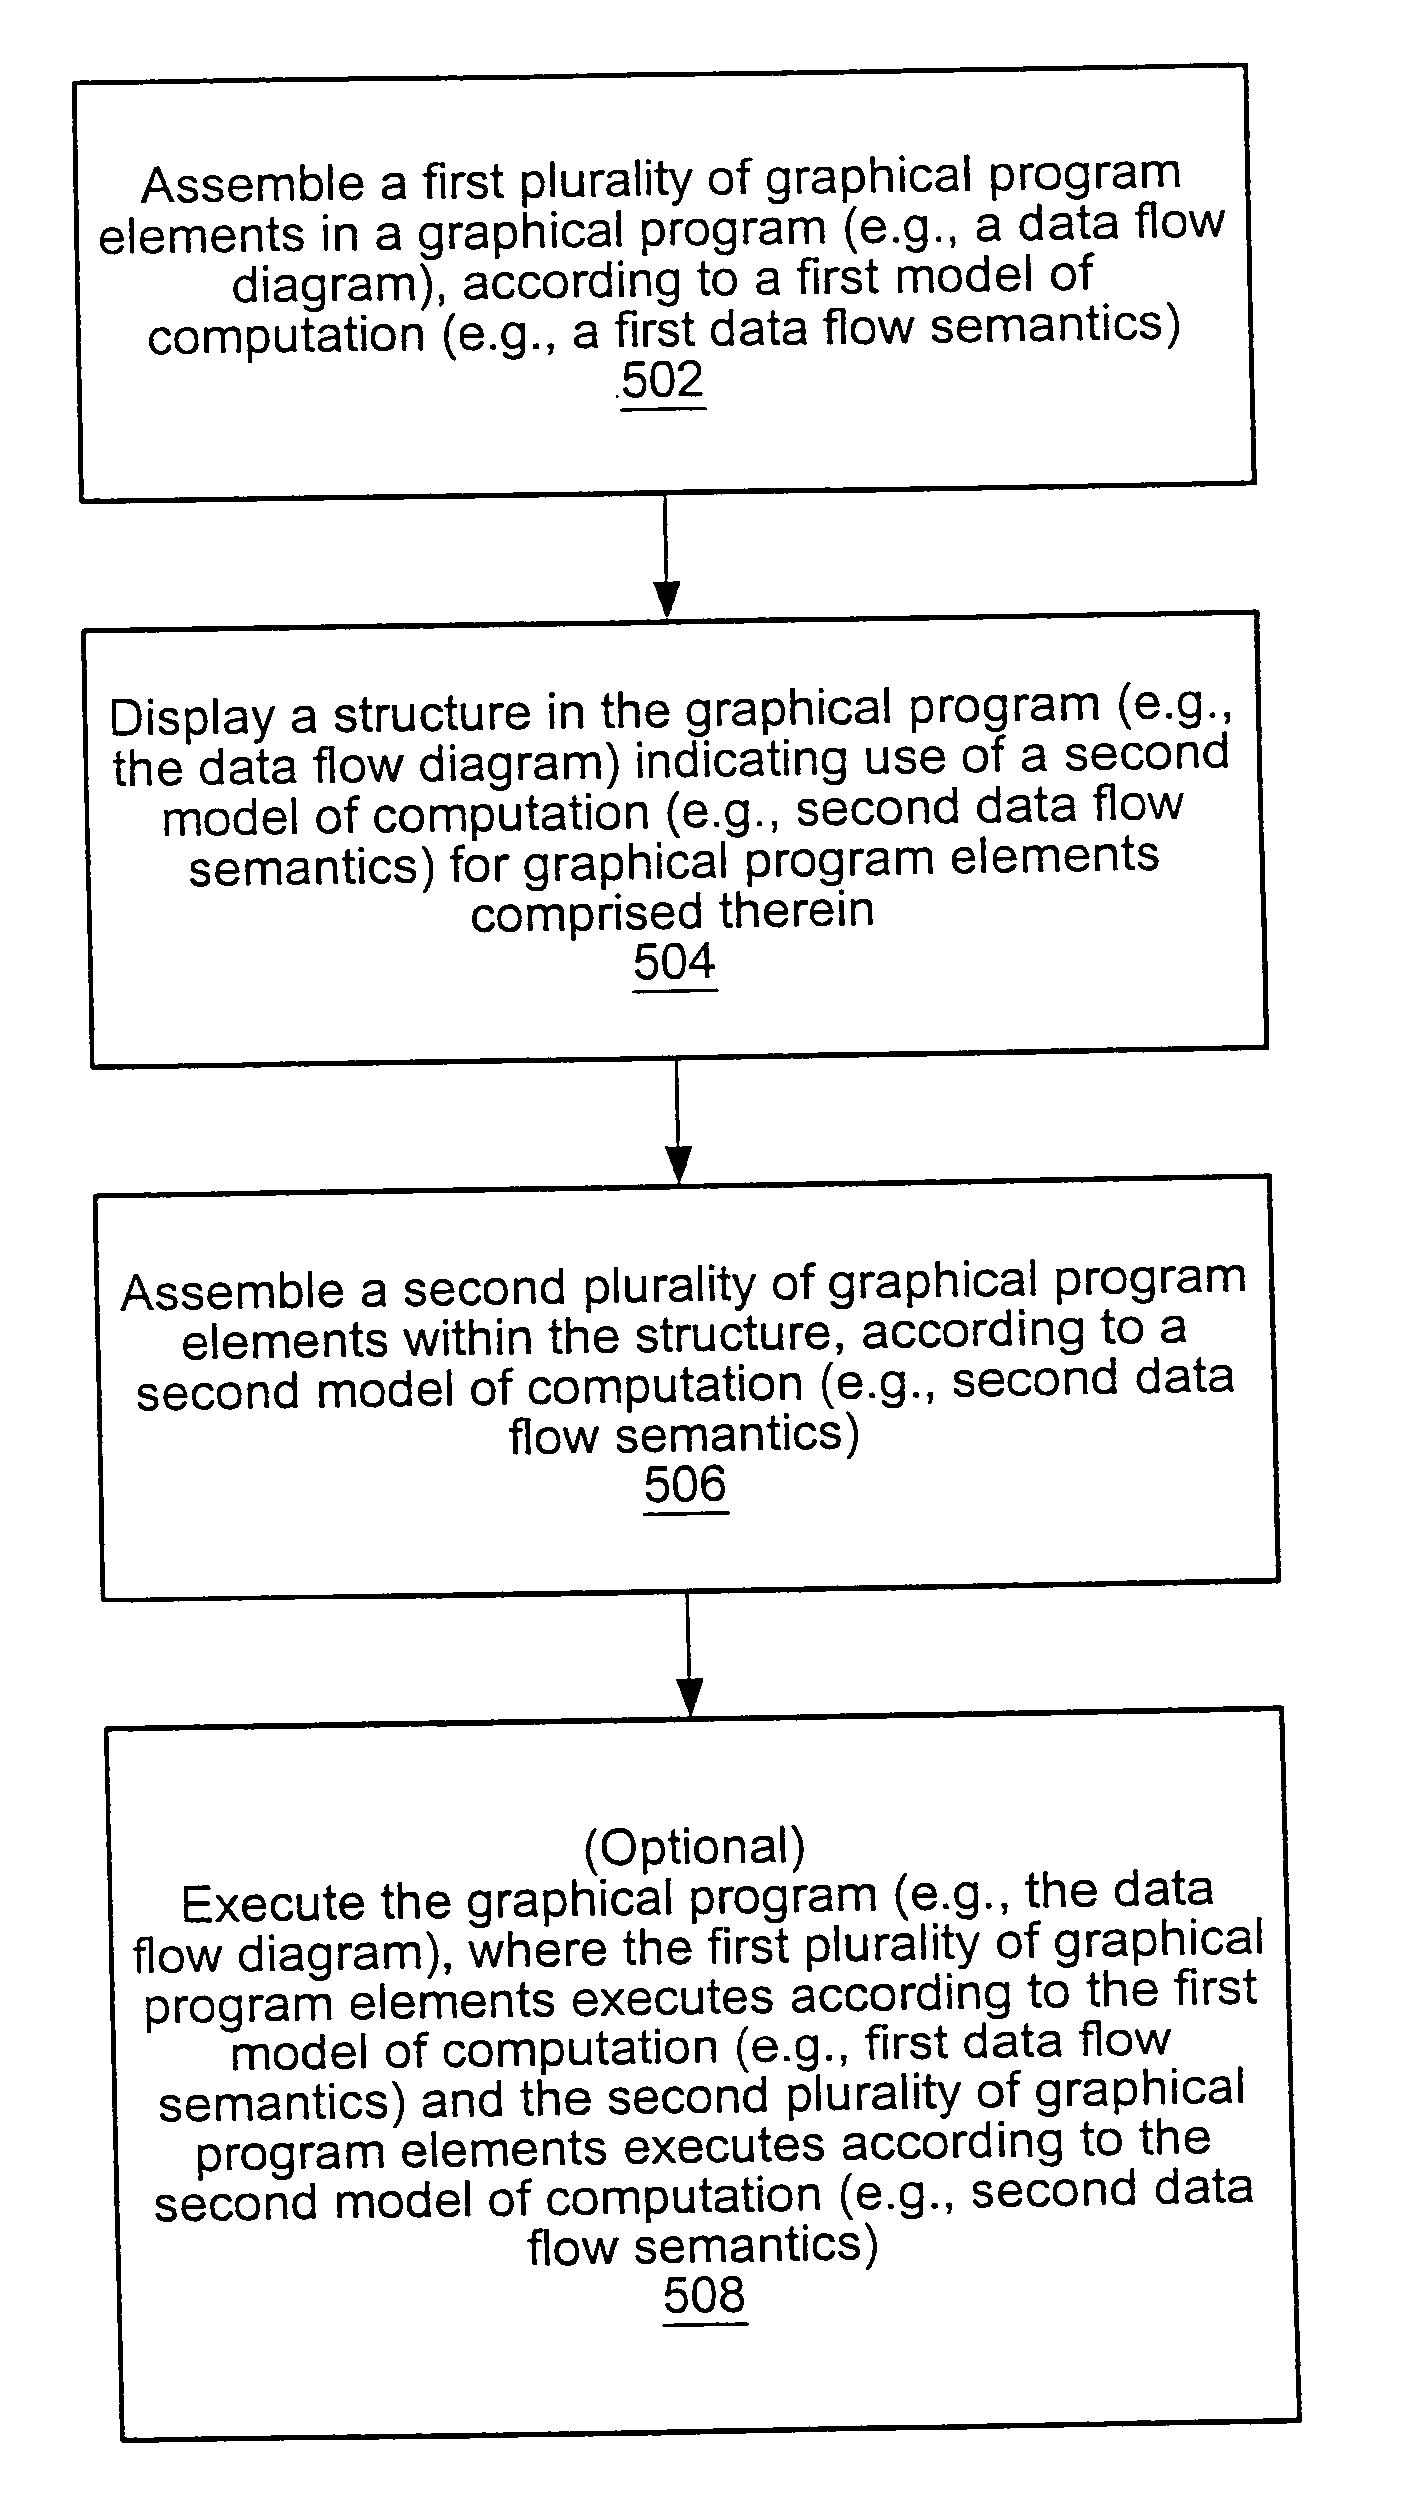 Graphical data flow programming environment with first model of computation that includes a structure supporting second model of computation